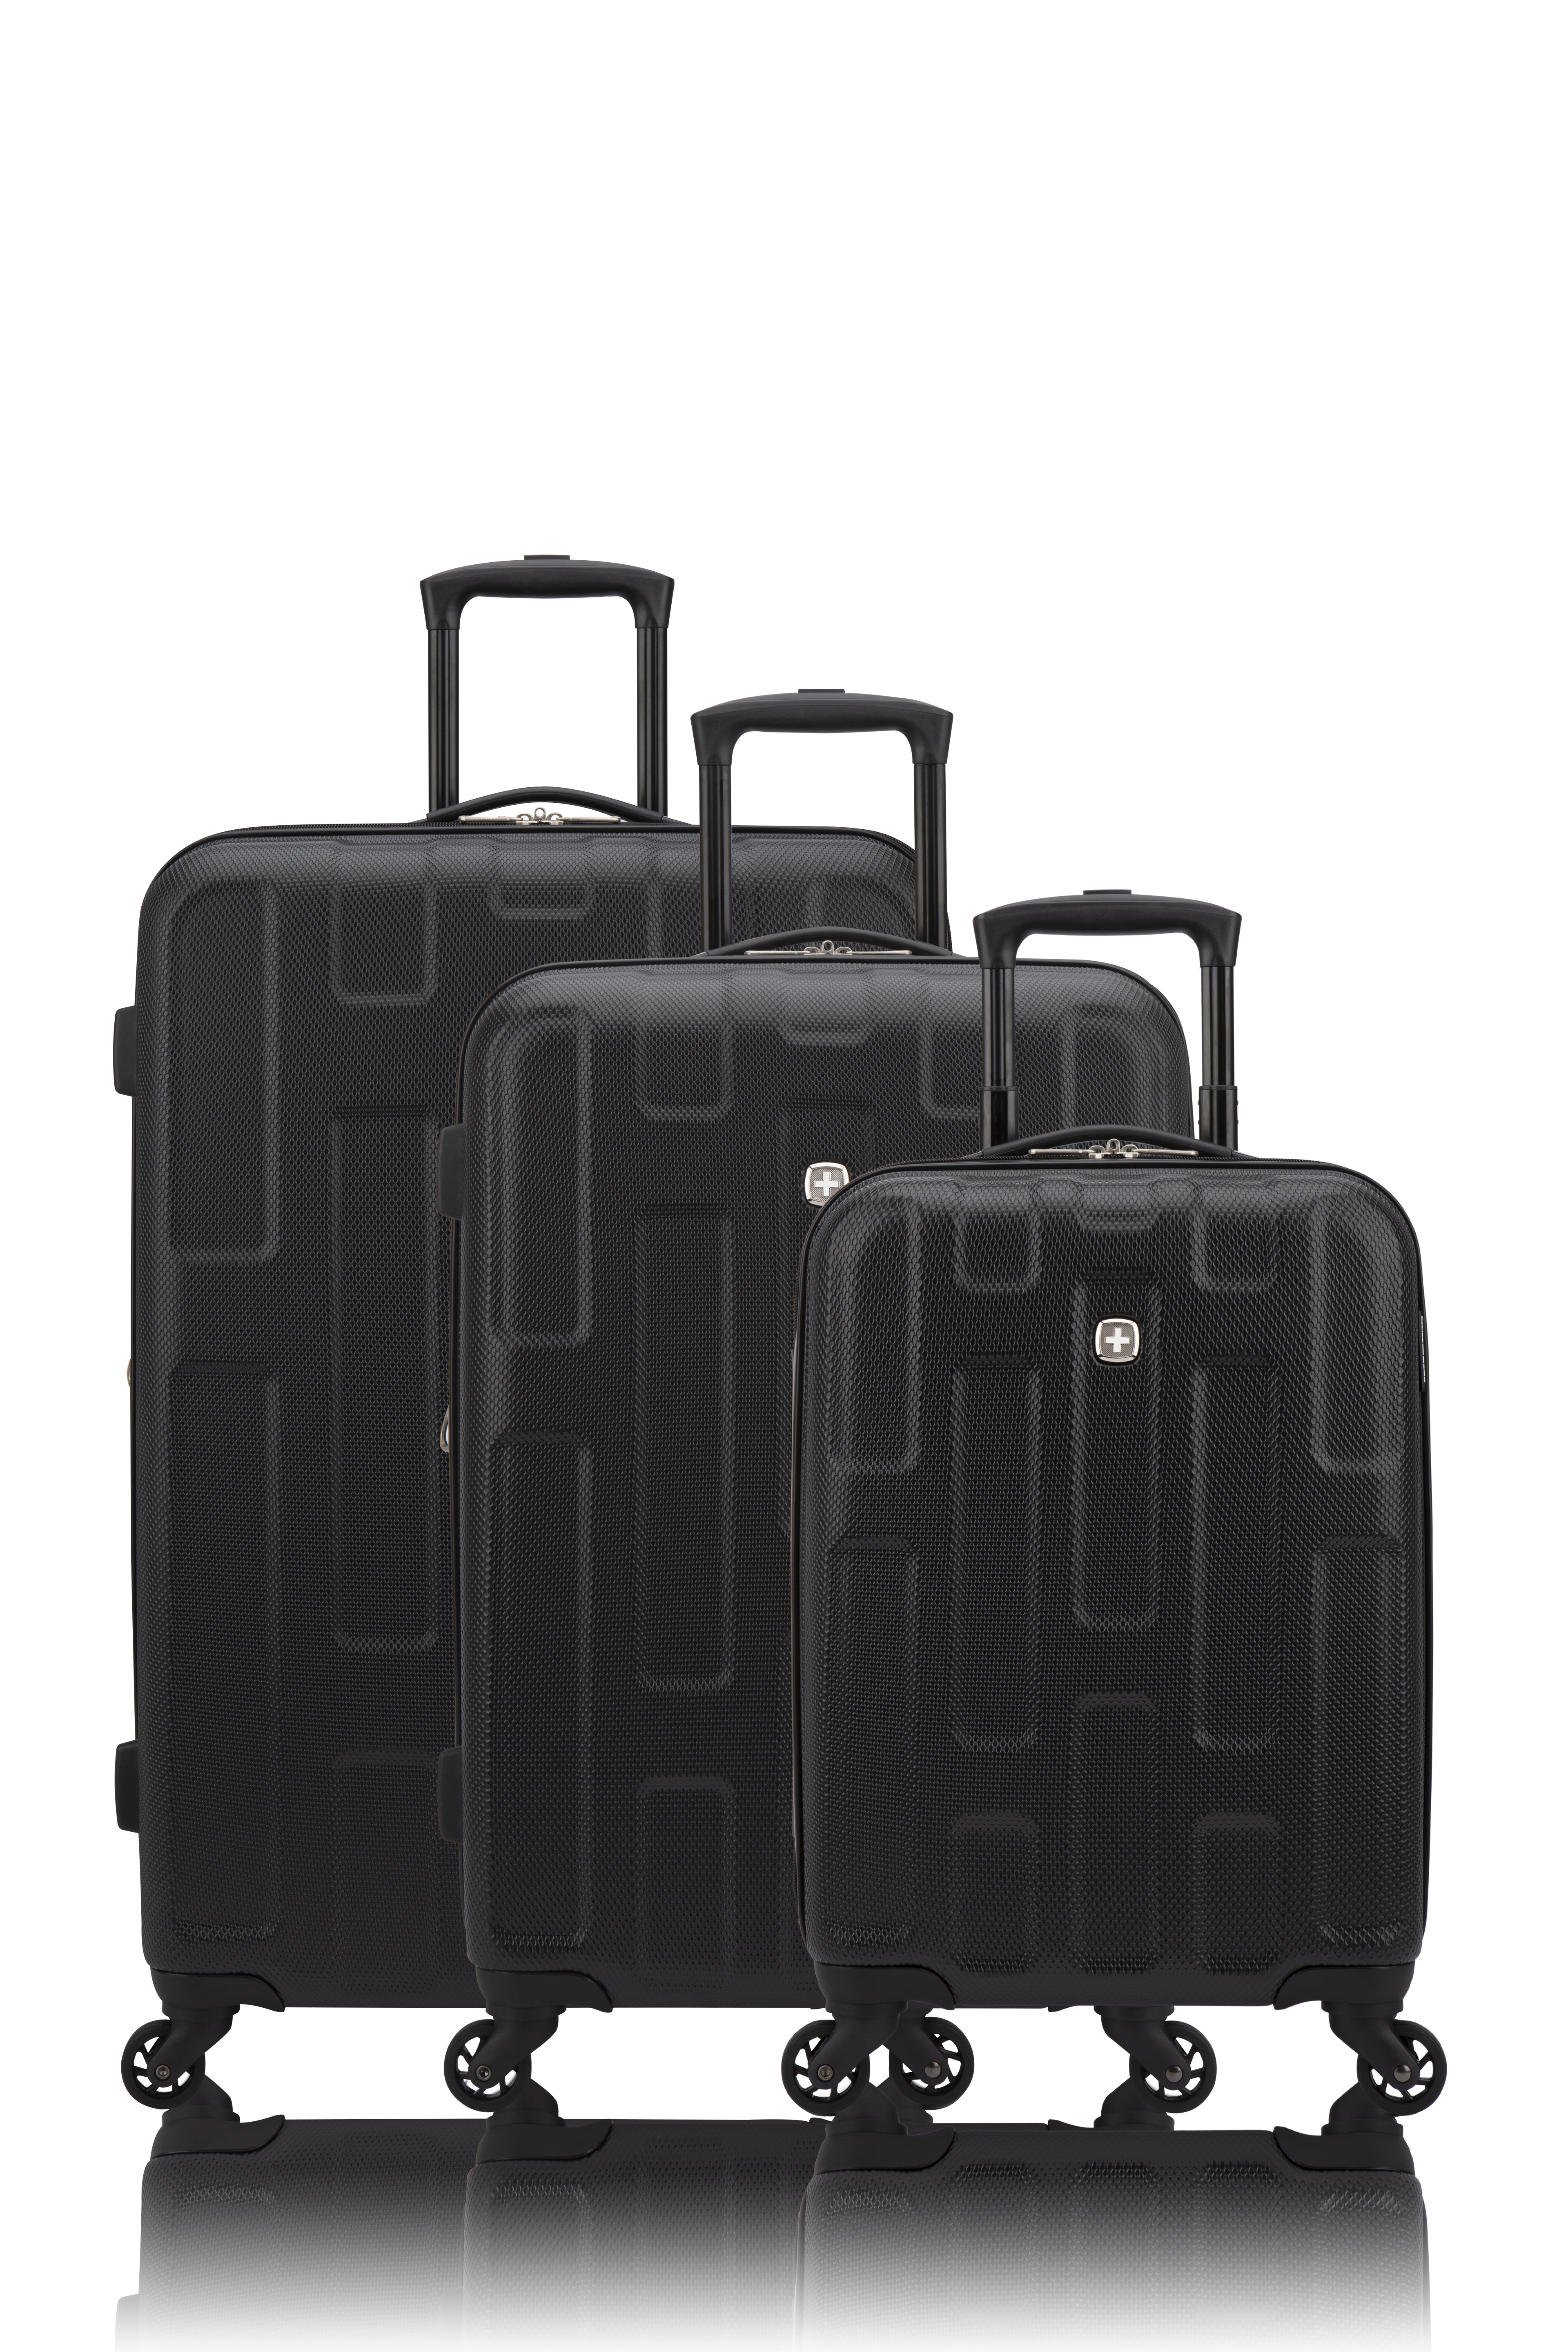 The best luggage brands to buy in the UK | CN Traveller